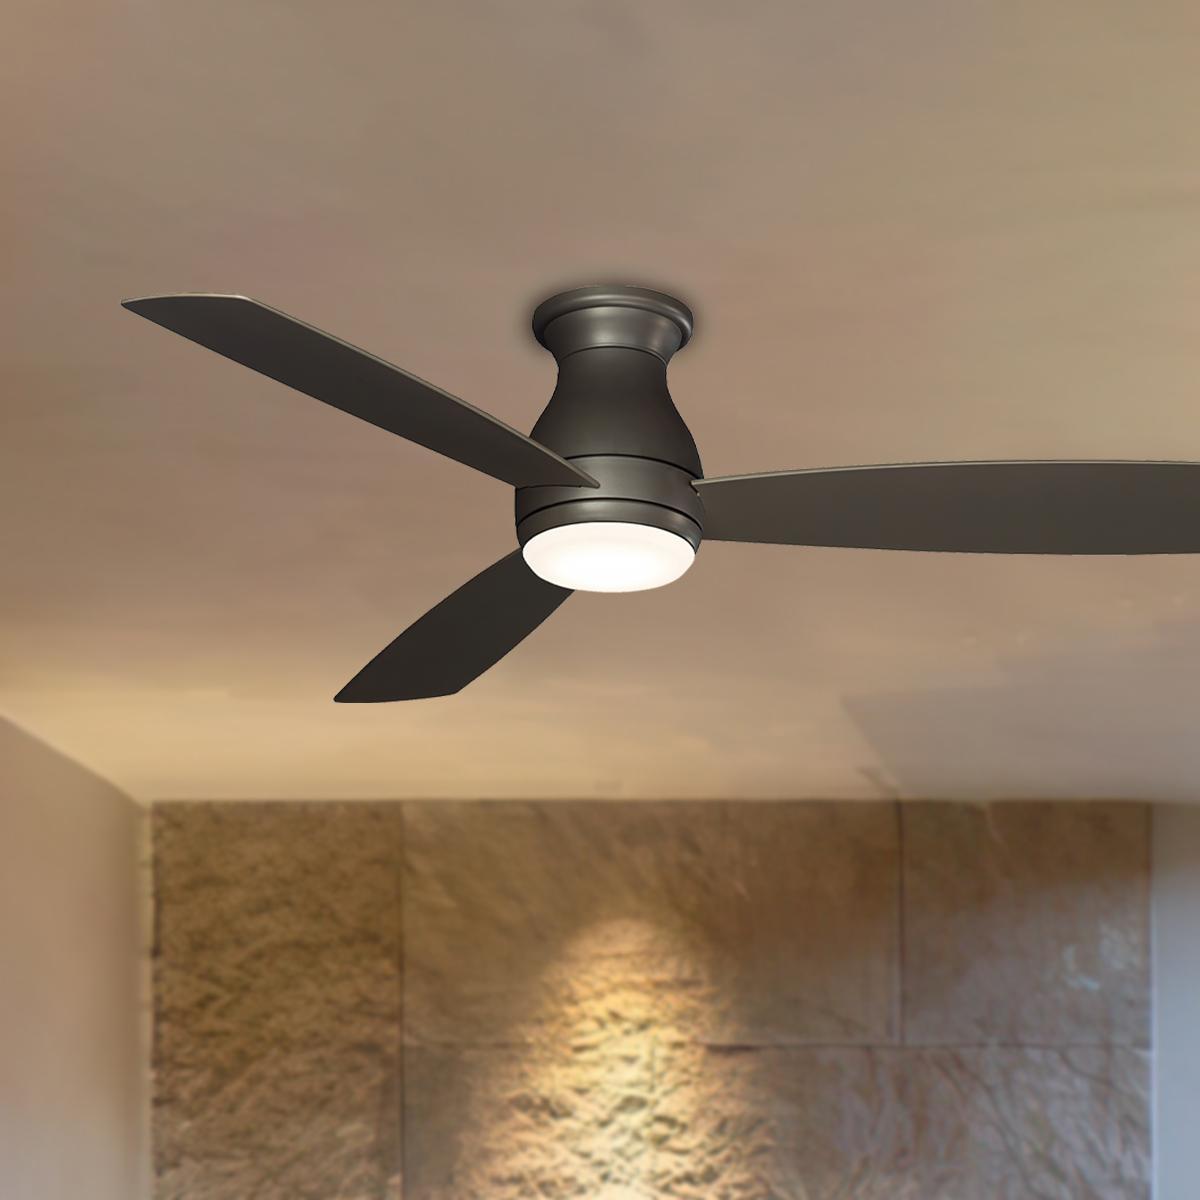 Hugh 52 Inch Modern Outdoor Flush Mount Ceiling Fan With Light And Remote